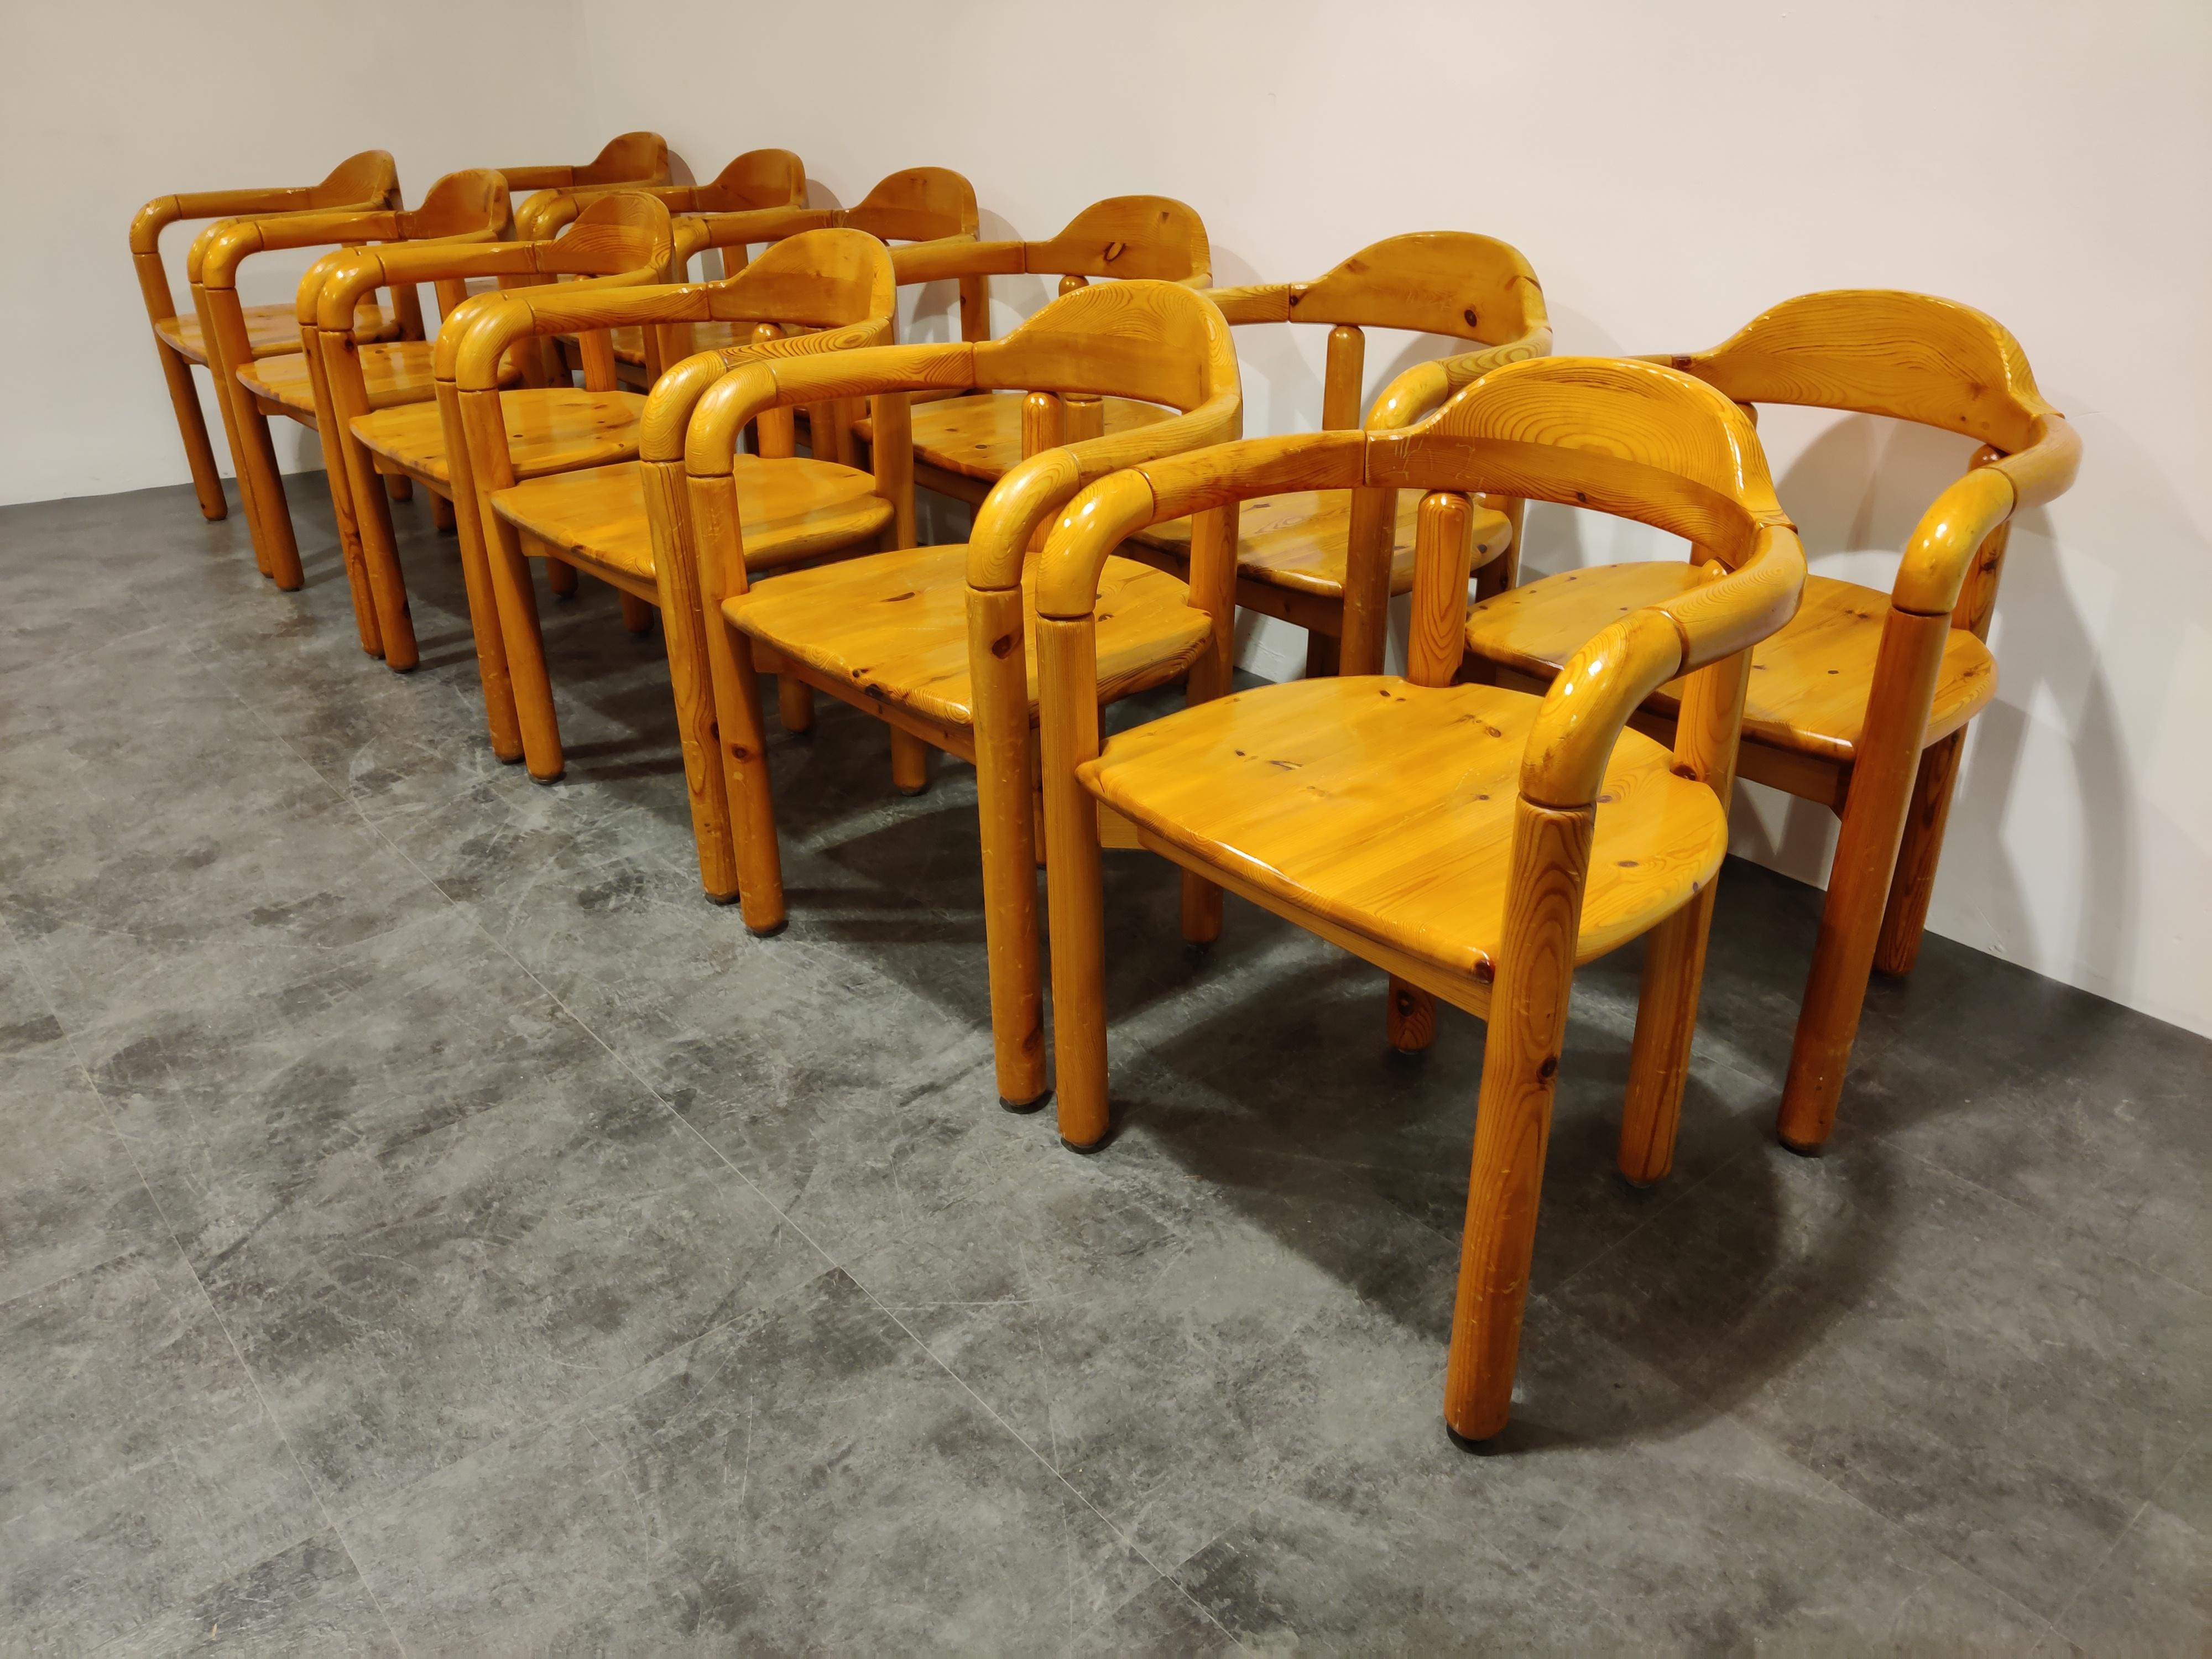 Set of 6 (6 others where sold) Scandinavian solid pine wood dining chairs by Rainer Daumilier for Hirtshals Savvaerk

Notice the way the armrest is attached to the front legs.

Beautiful timeless design.

Condition:
- Normal signs of wear on the